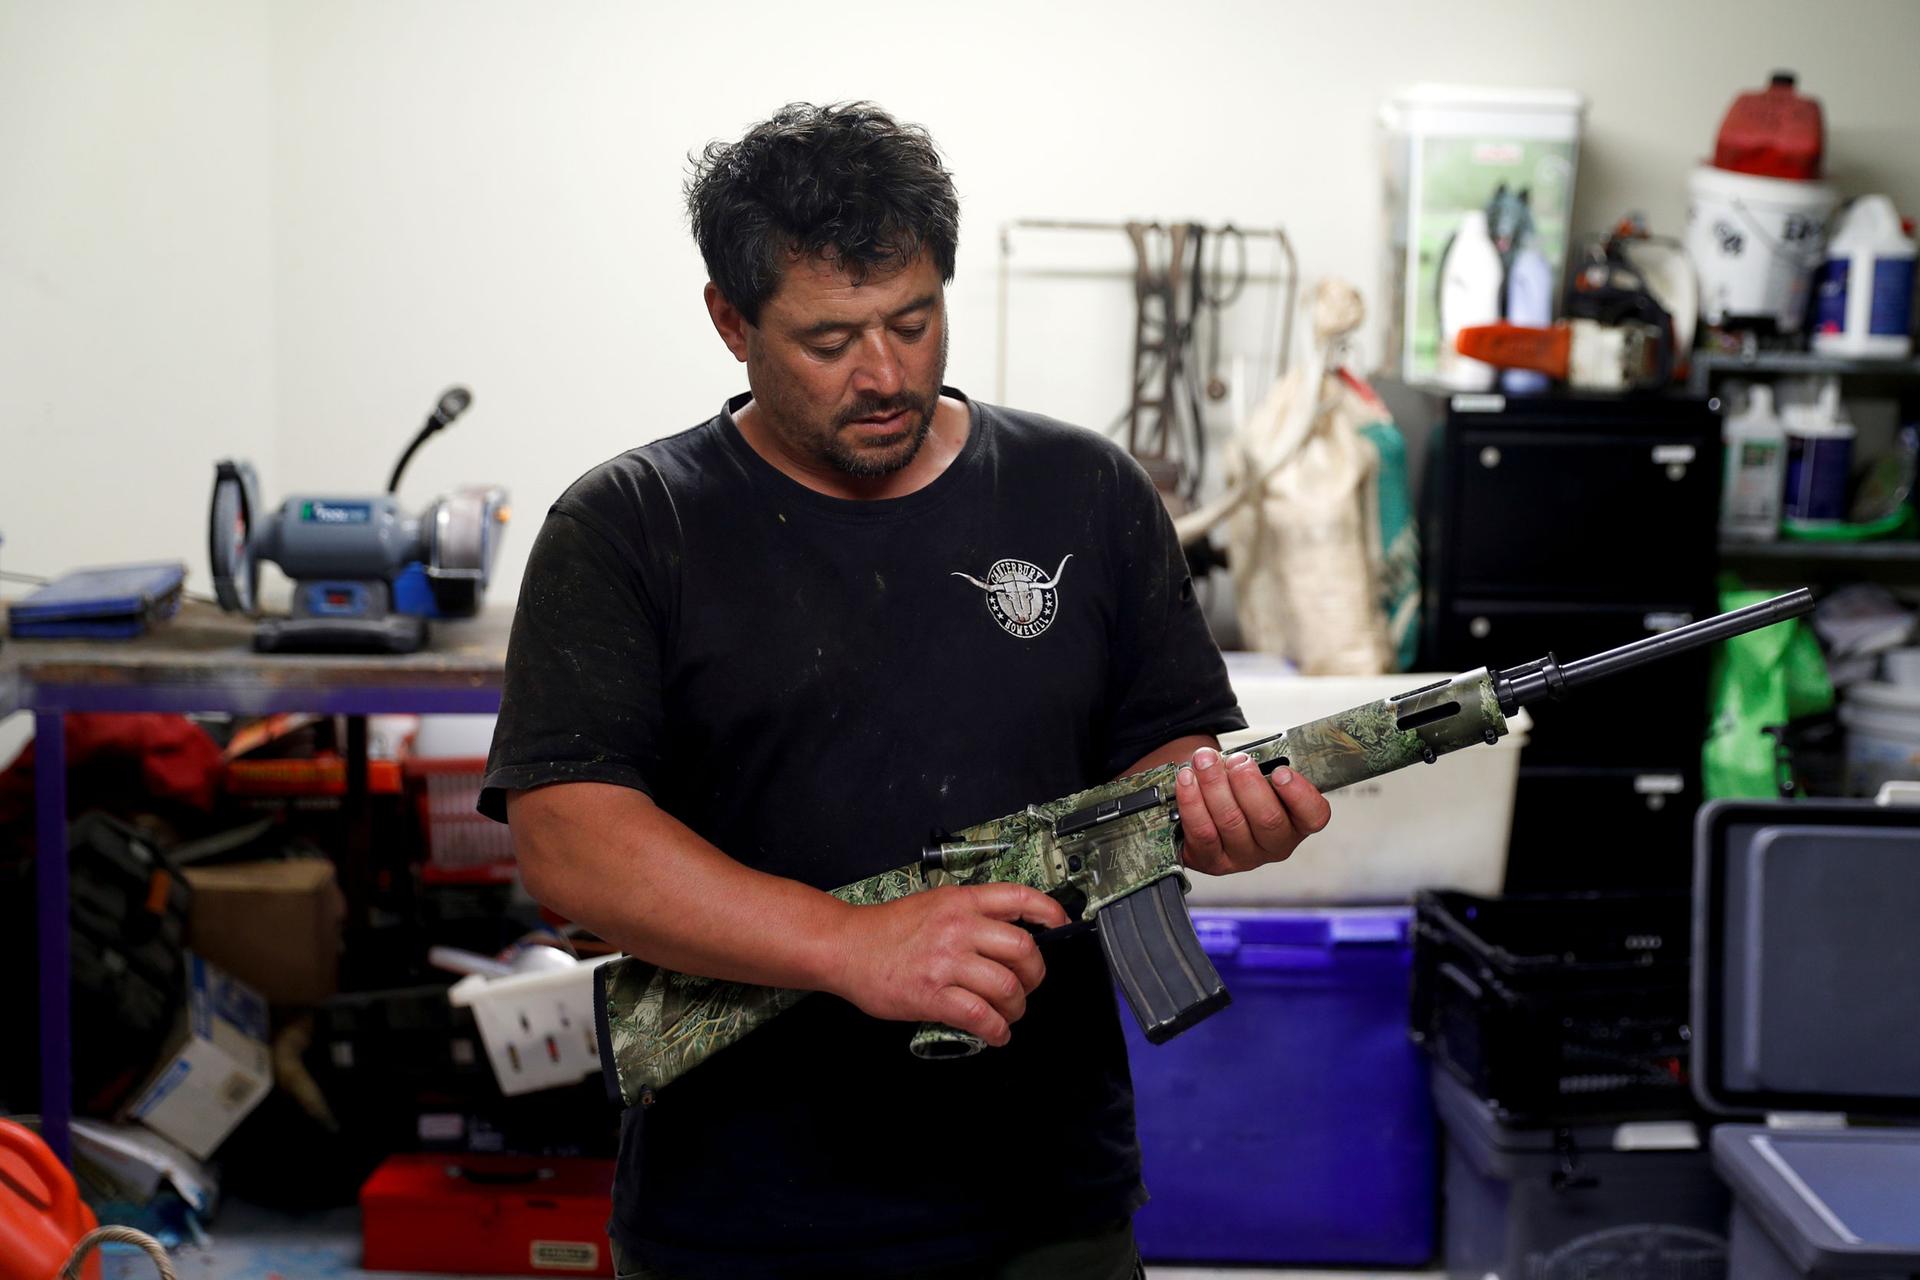 Noel Womersley is shown standing in a drak shirt holding his AR-15 semi-automatic rifle.